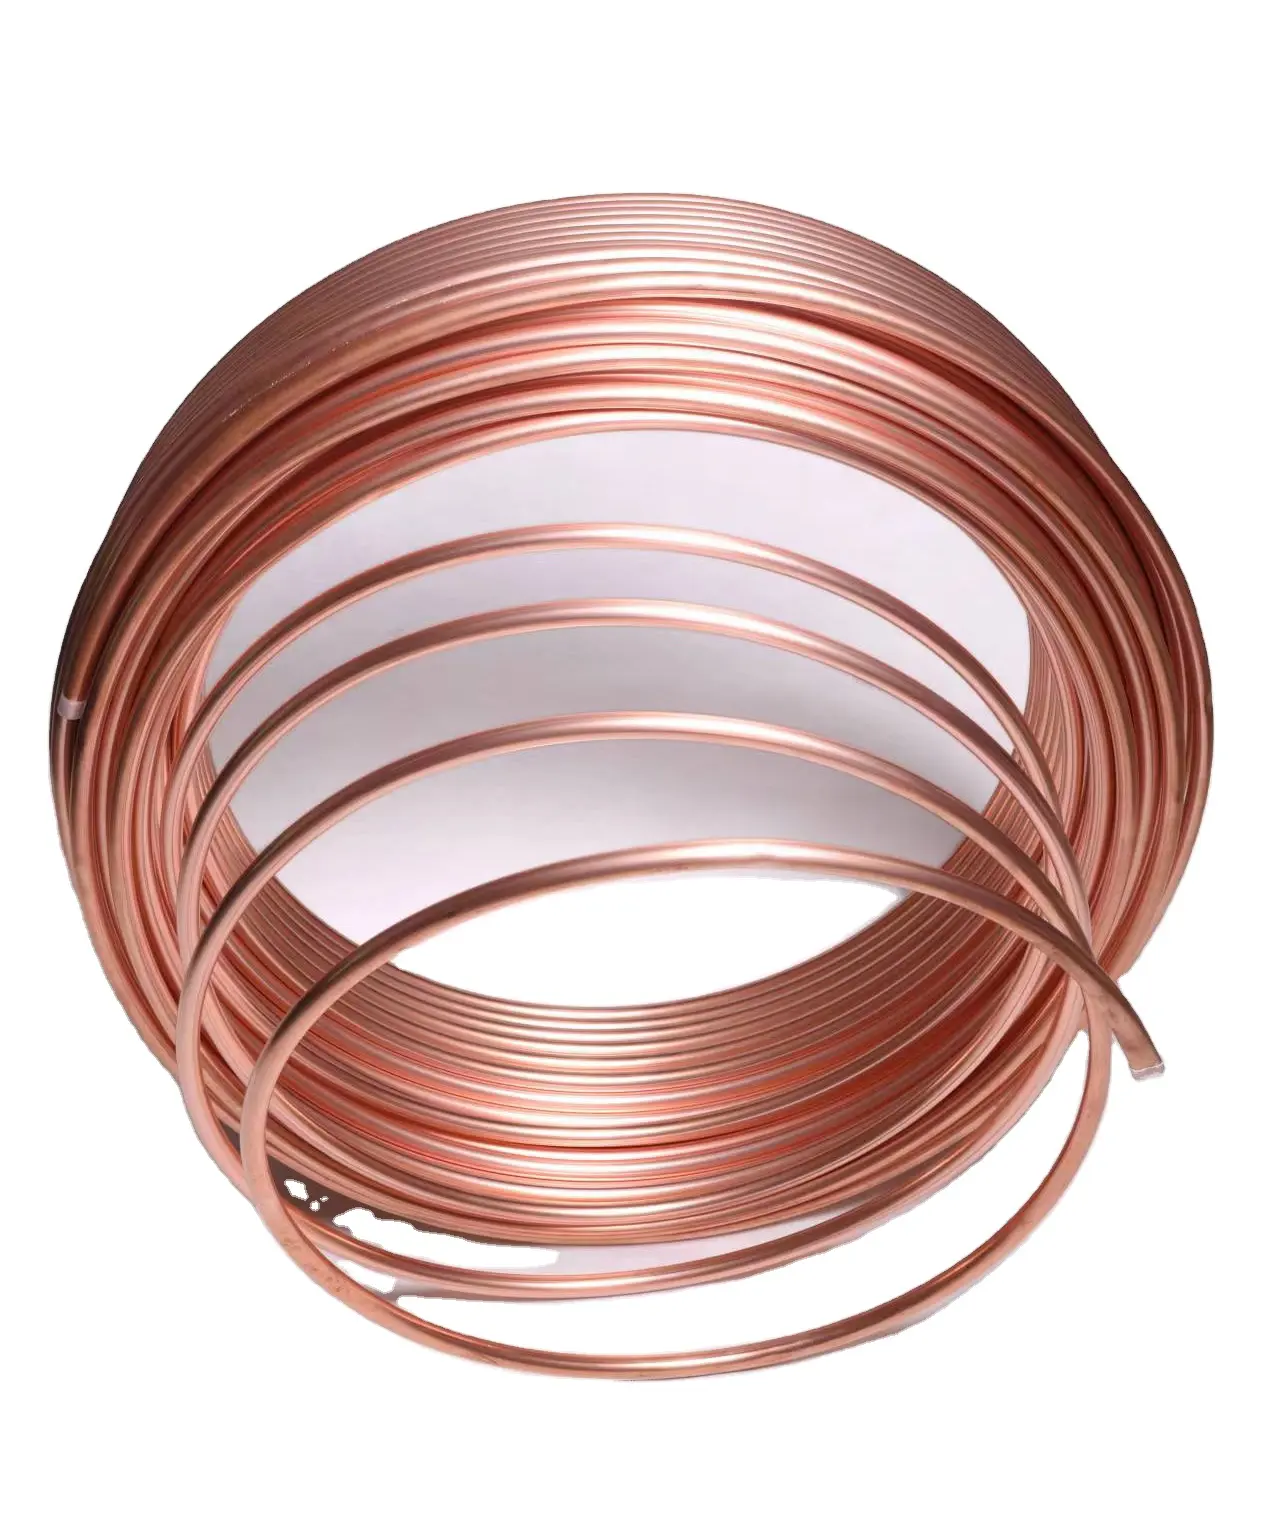 Low price Air condition pancake coil copper pipe 3/8 inch 3/4 inch oxygen copper tube